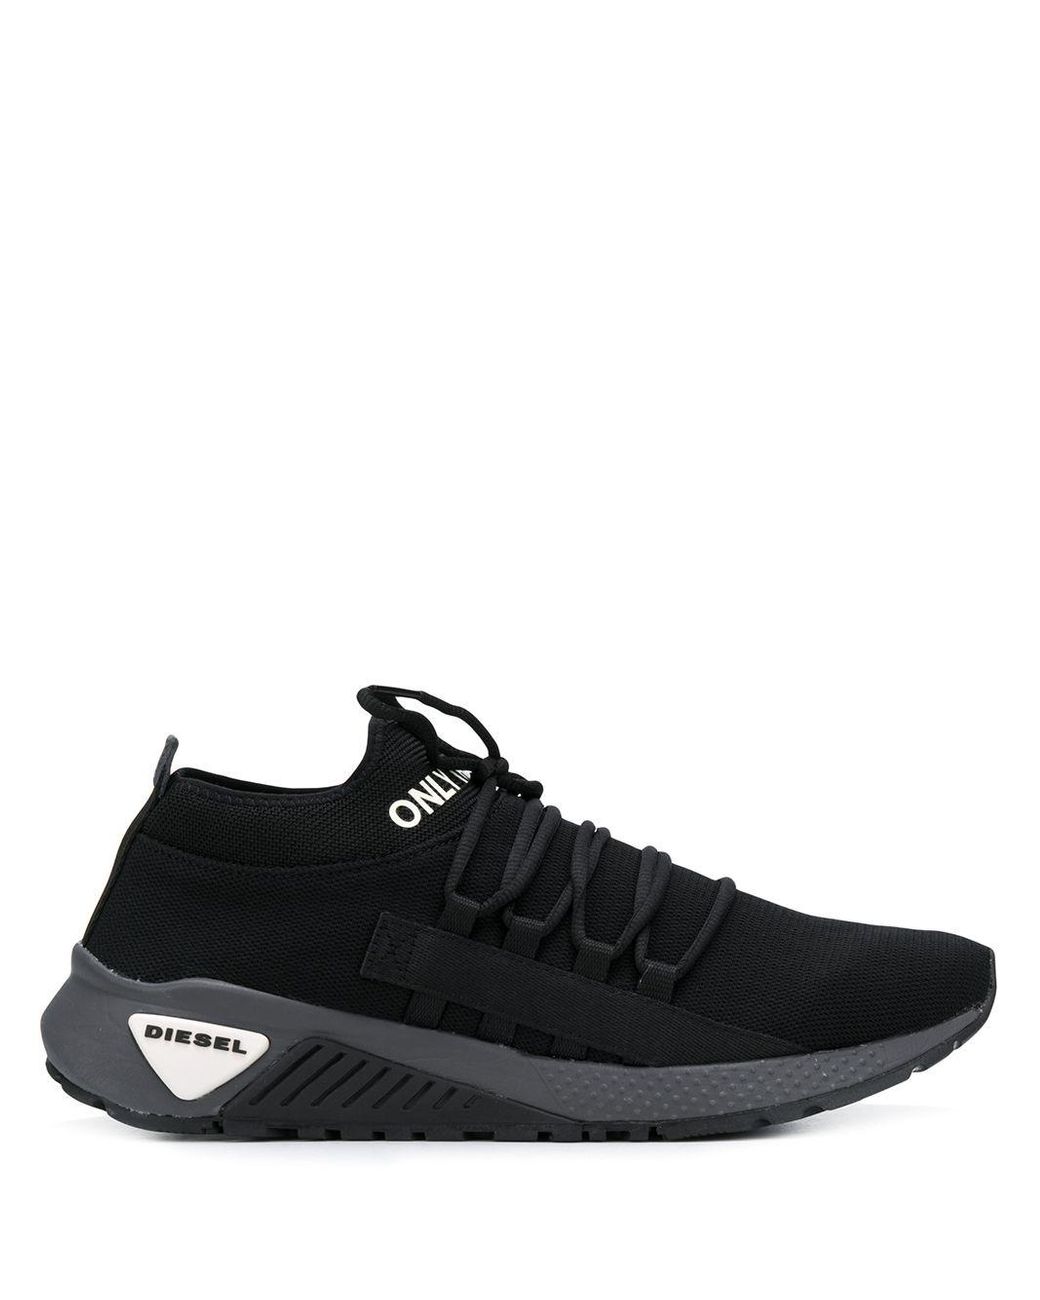 DIESEL High Top Only The Brave Sneakers in Black for Men | Lyst